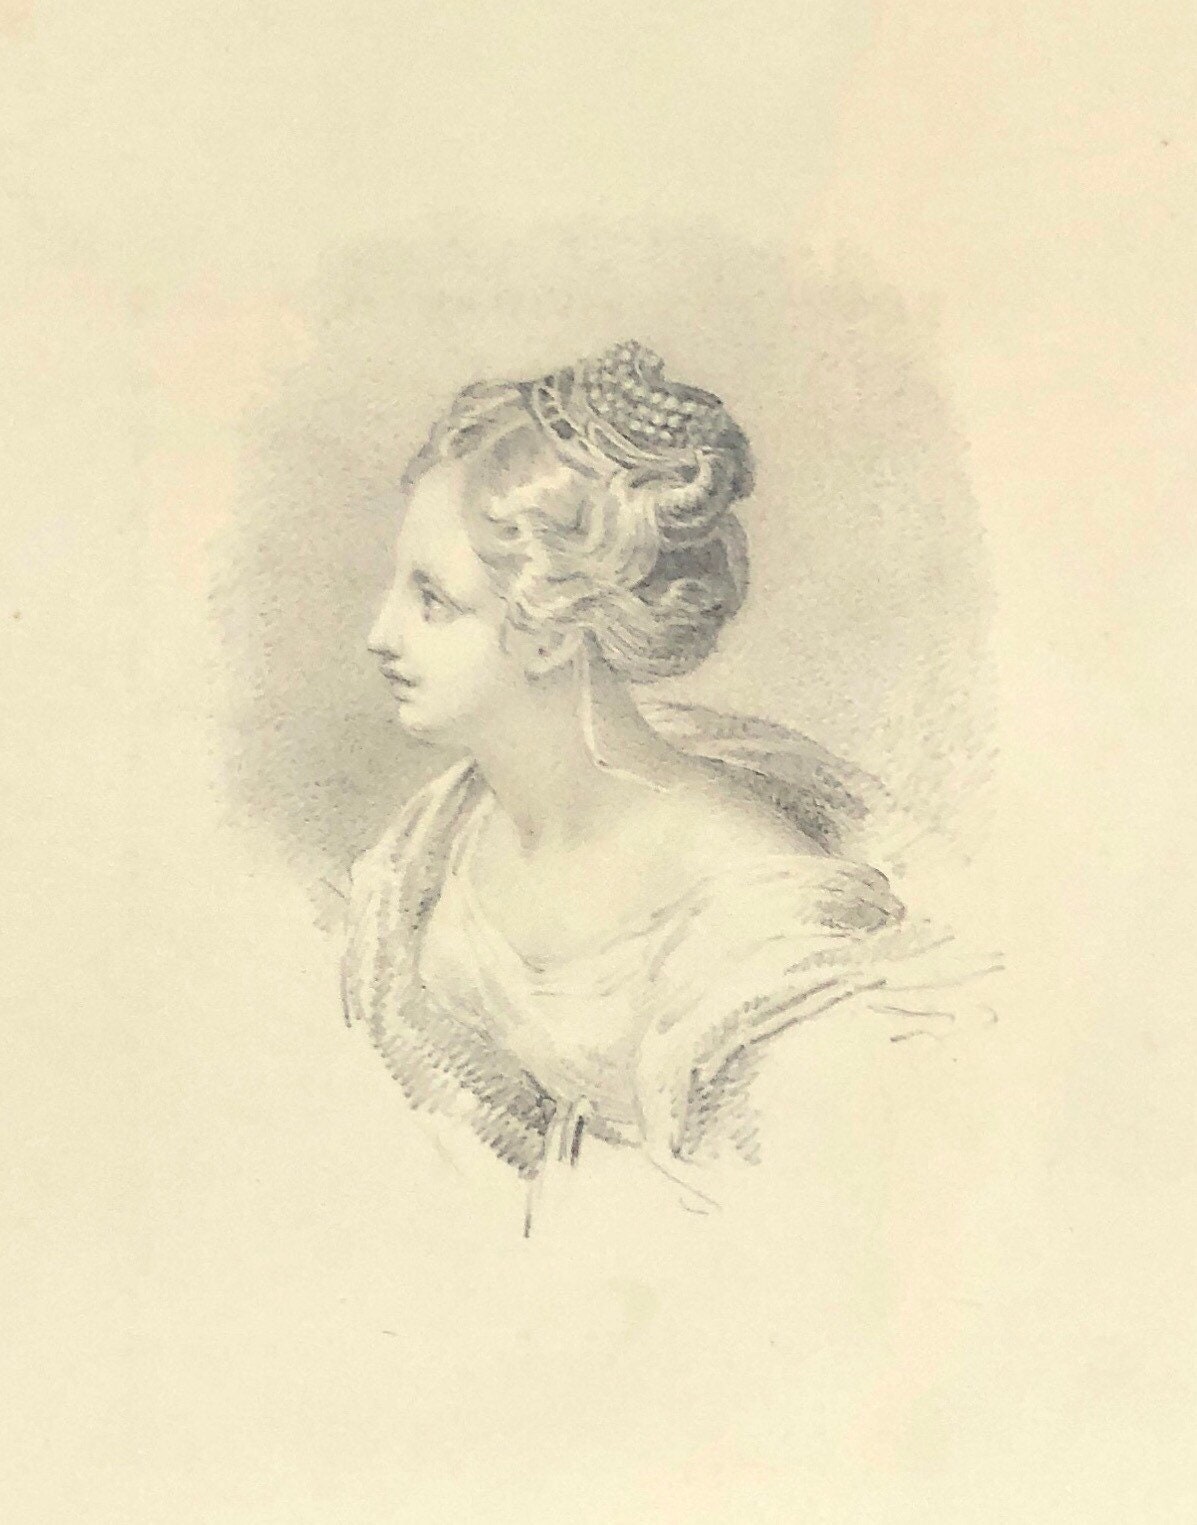 A Pencil Portrait of A Woman. English. Georgian; that is dating around 1840. Size: 14 x 12 cms.